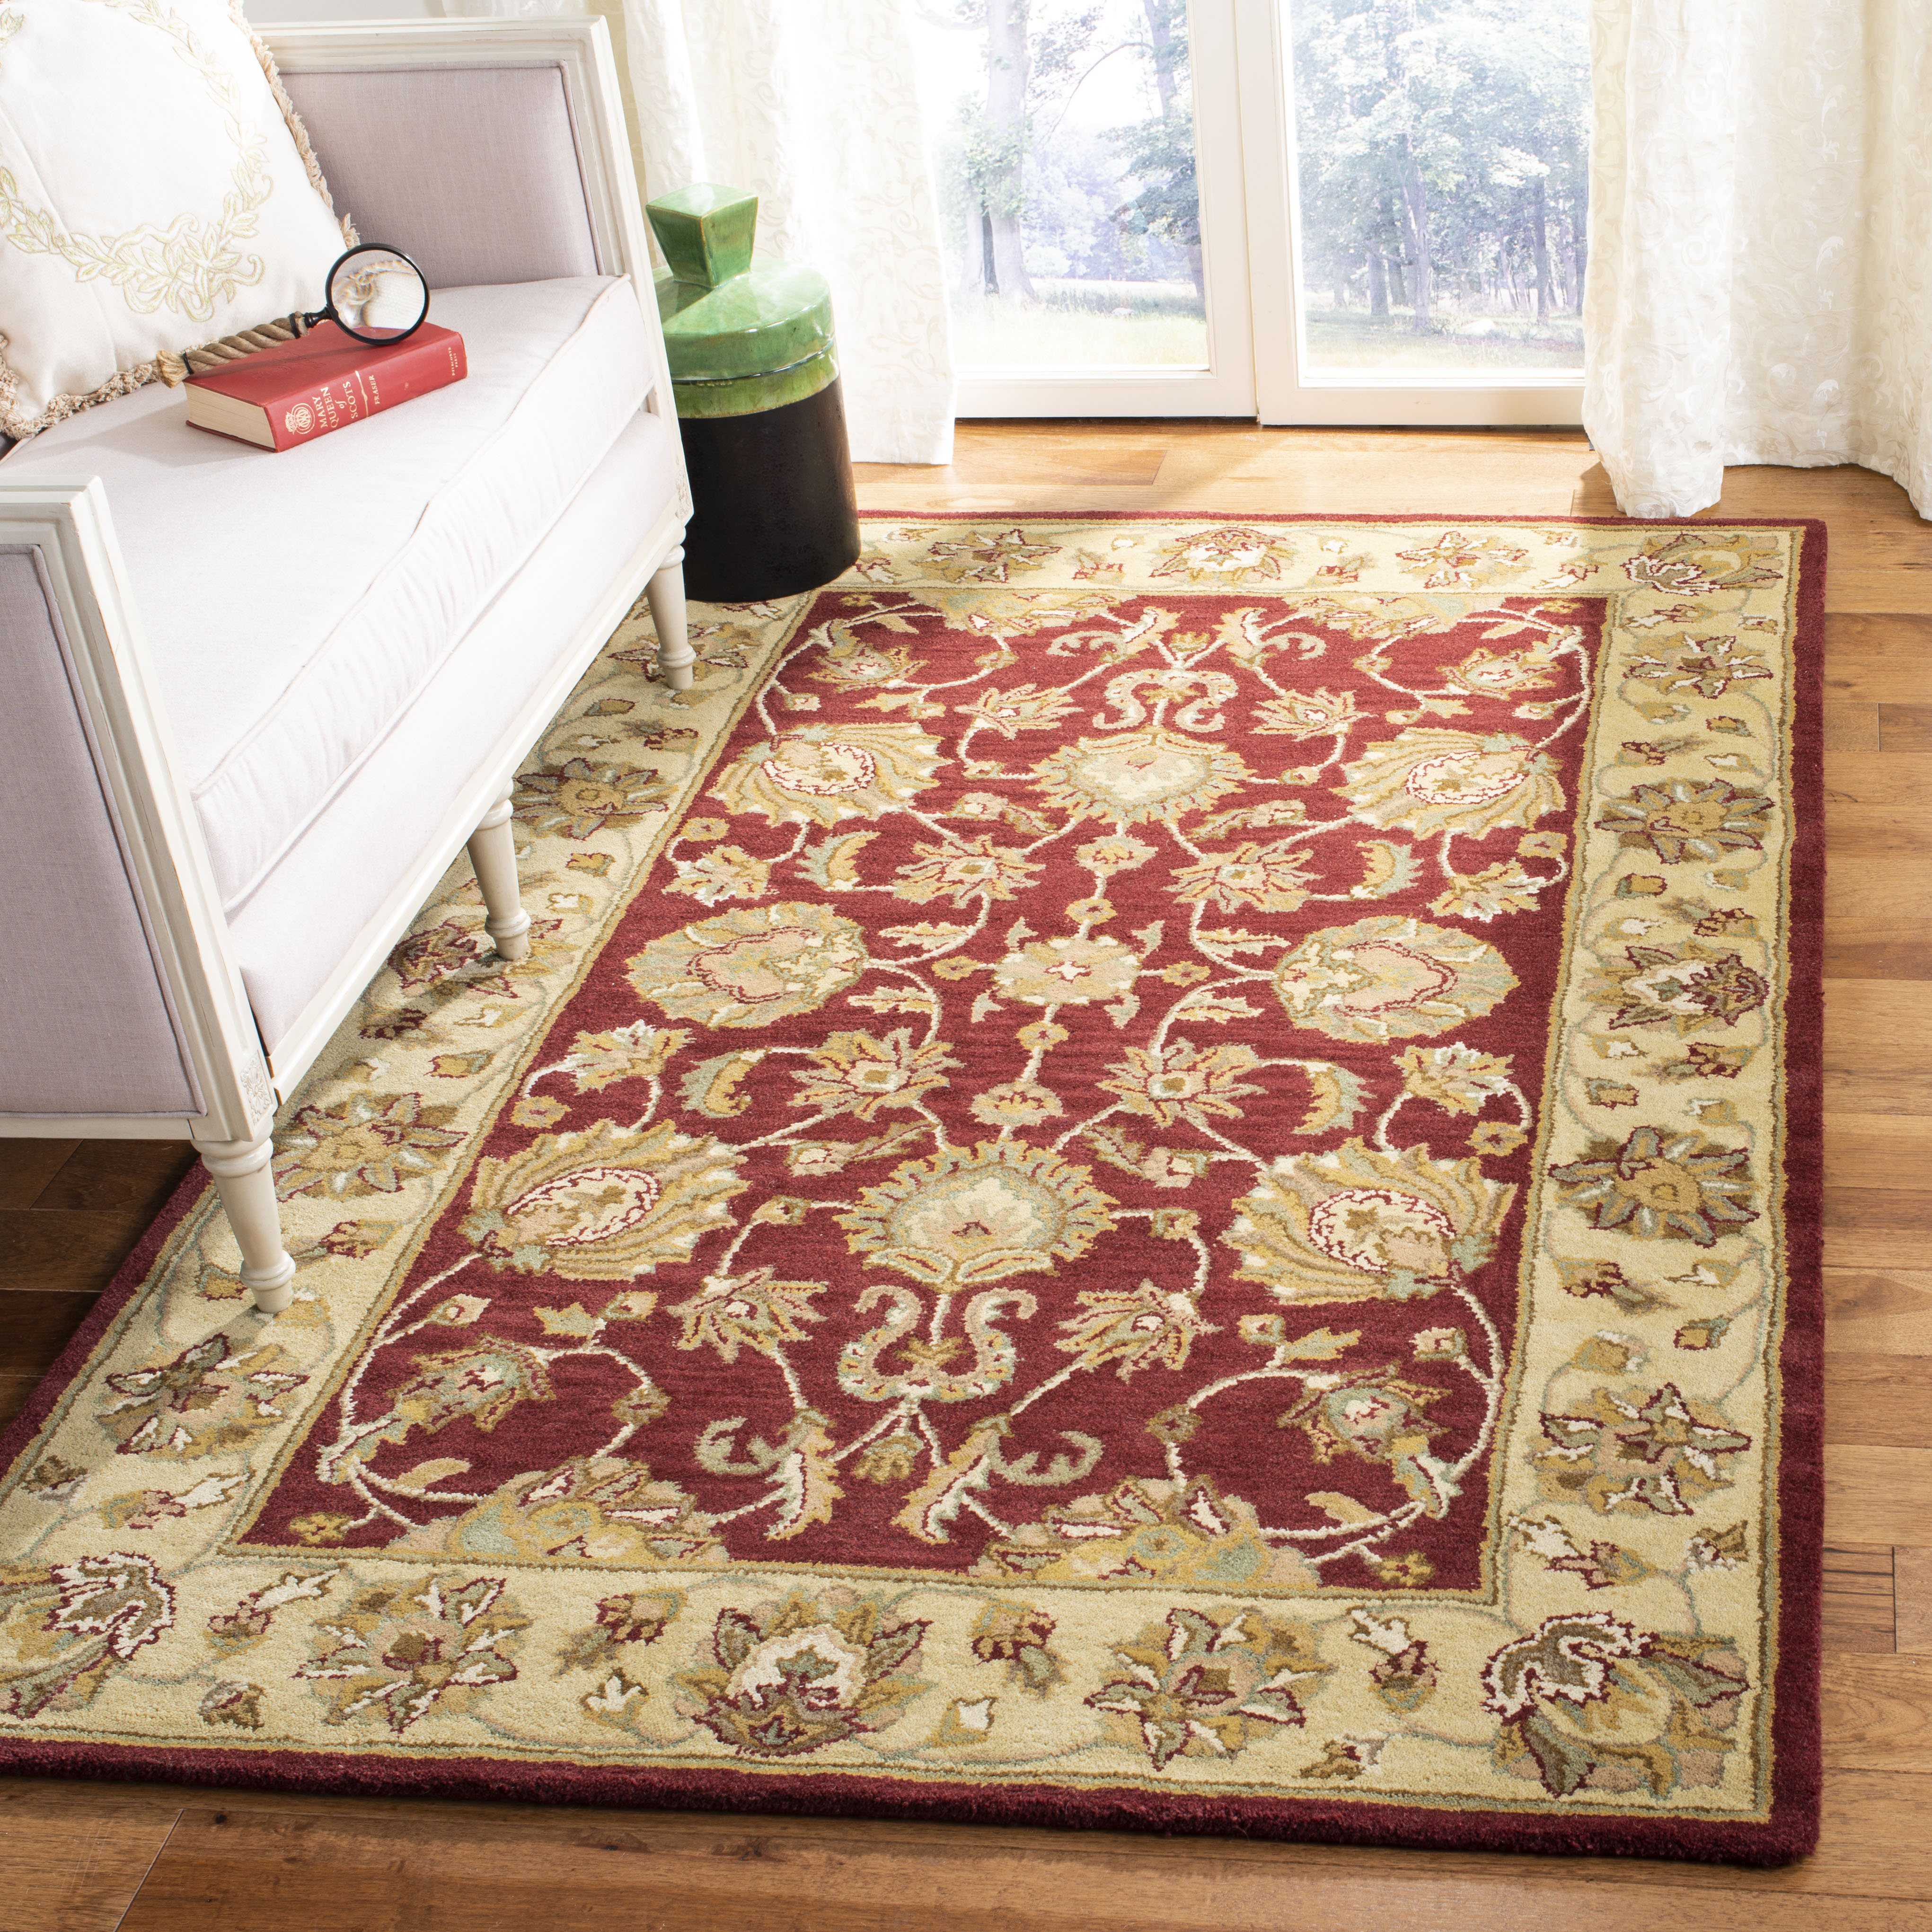 SAFAVIEH Heritage Regis Traditional Wool Area Rug, Red/Gold, 3' x 5' - image 1 of 5